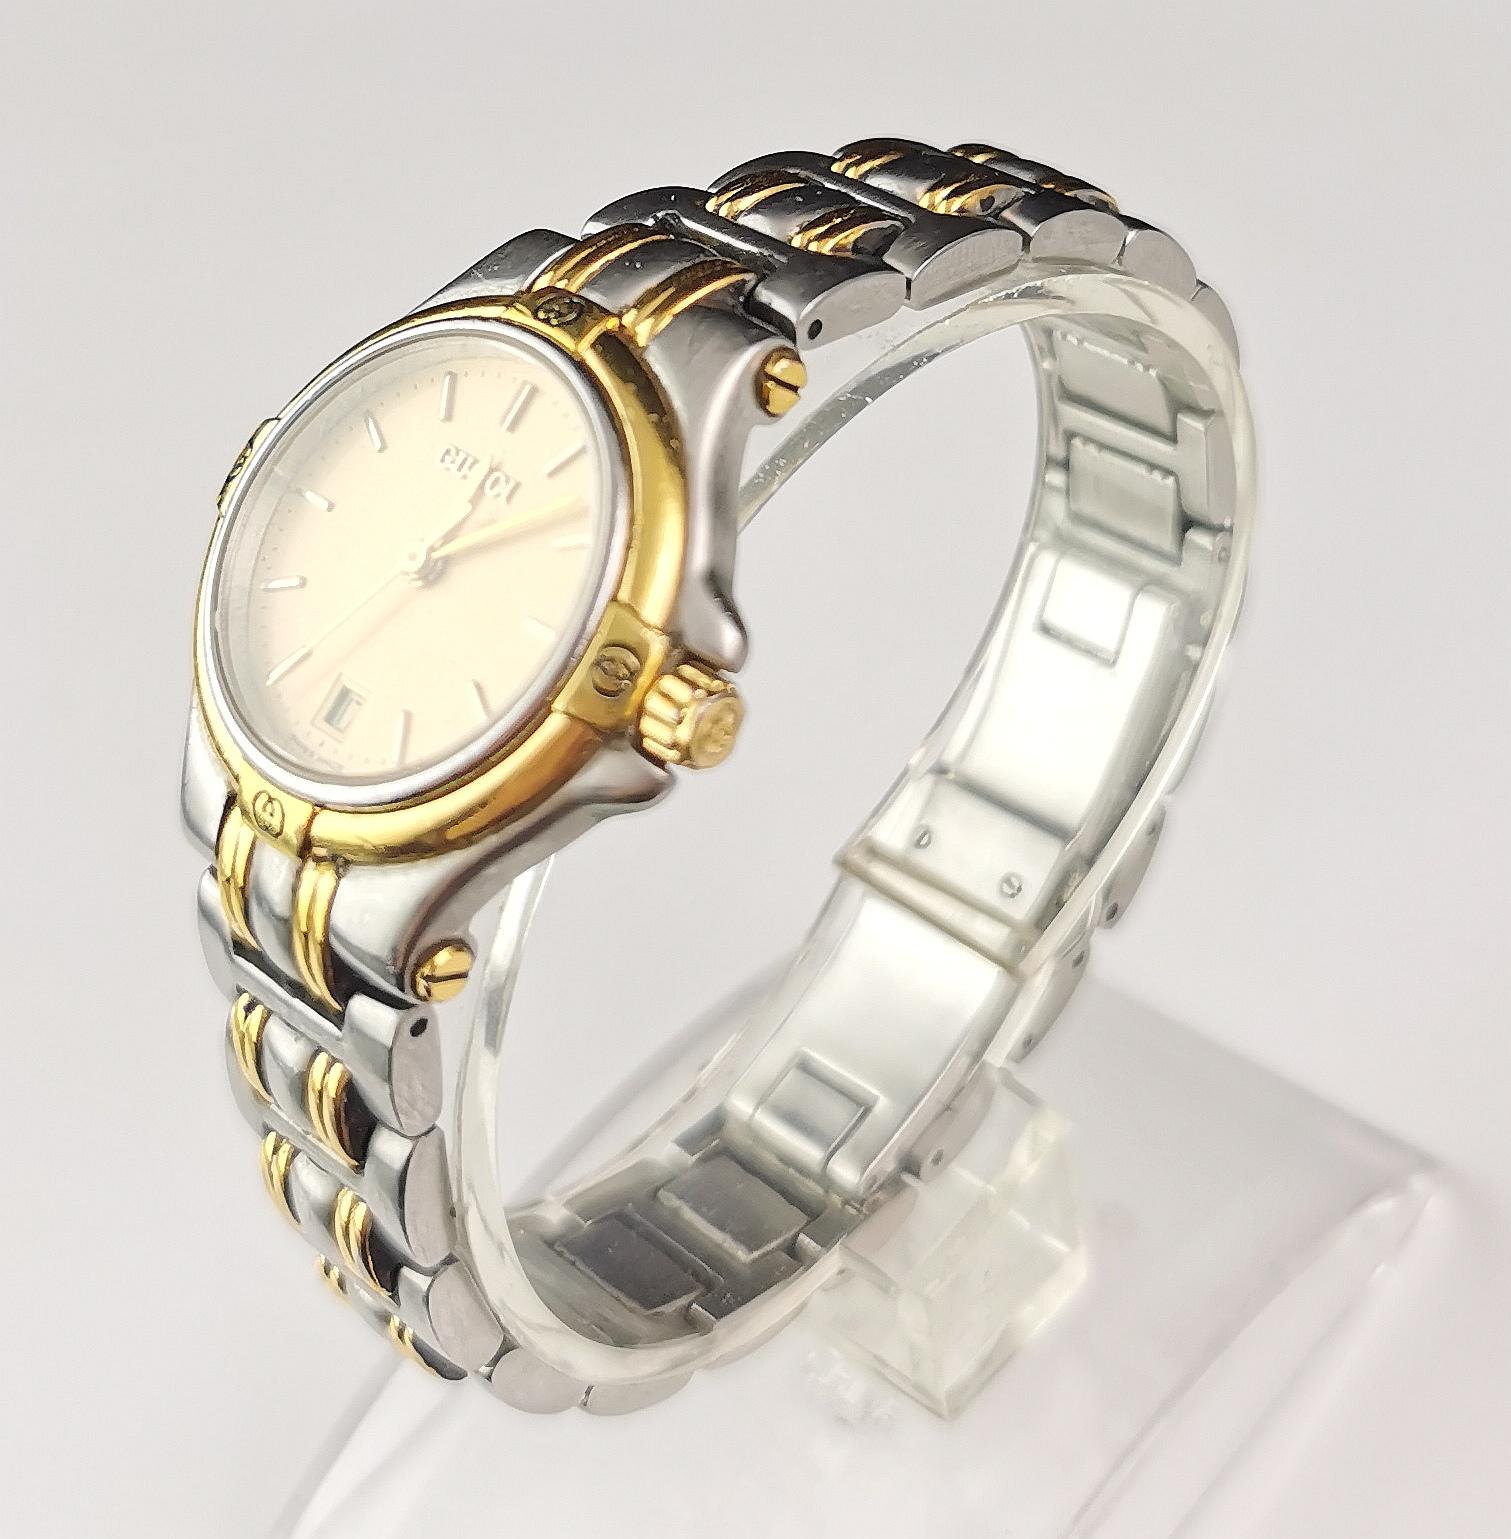 Gucci 9040l Ladies wristwatch, Stainless steel and gold plated  For Sale 3